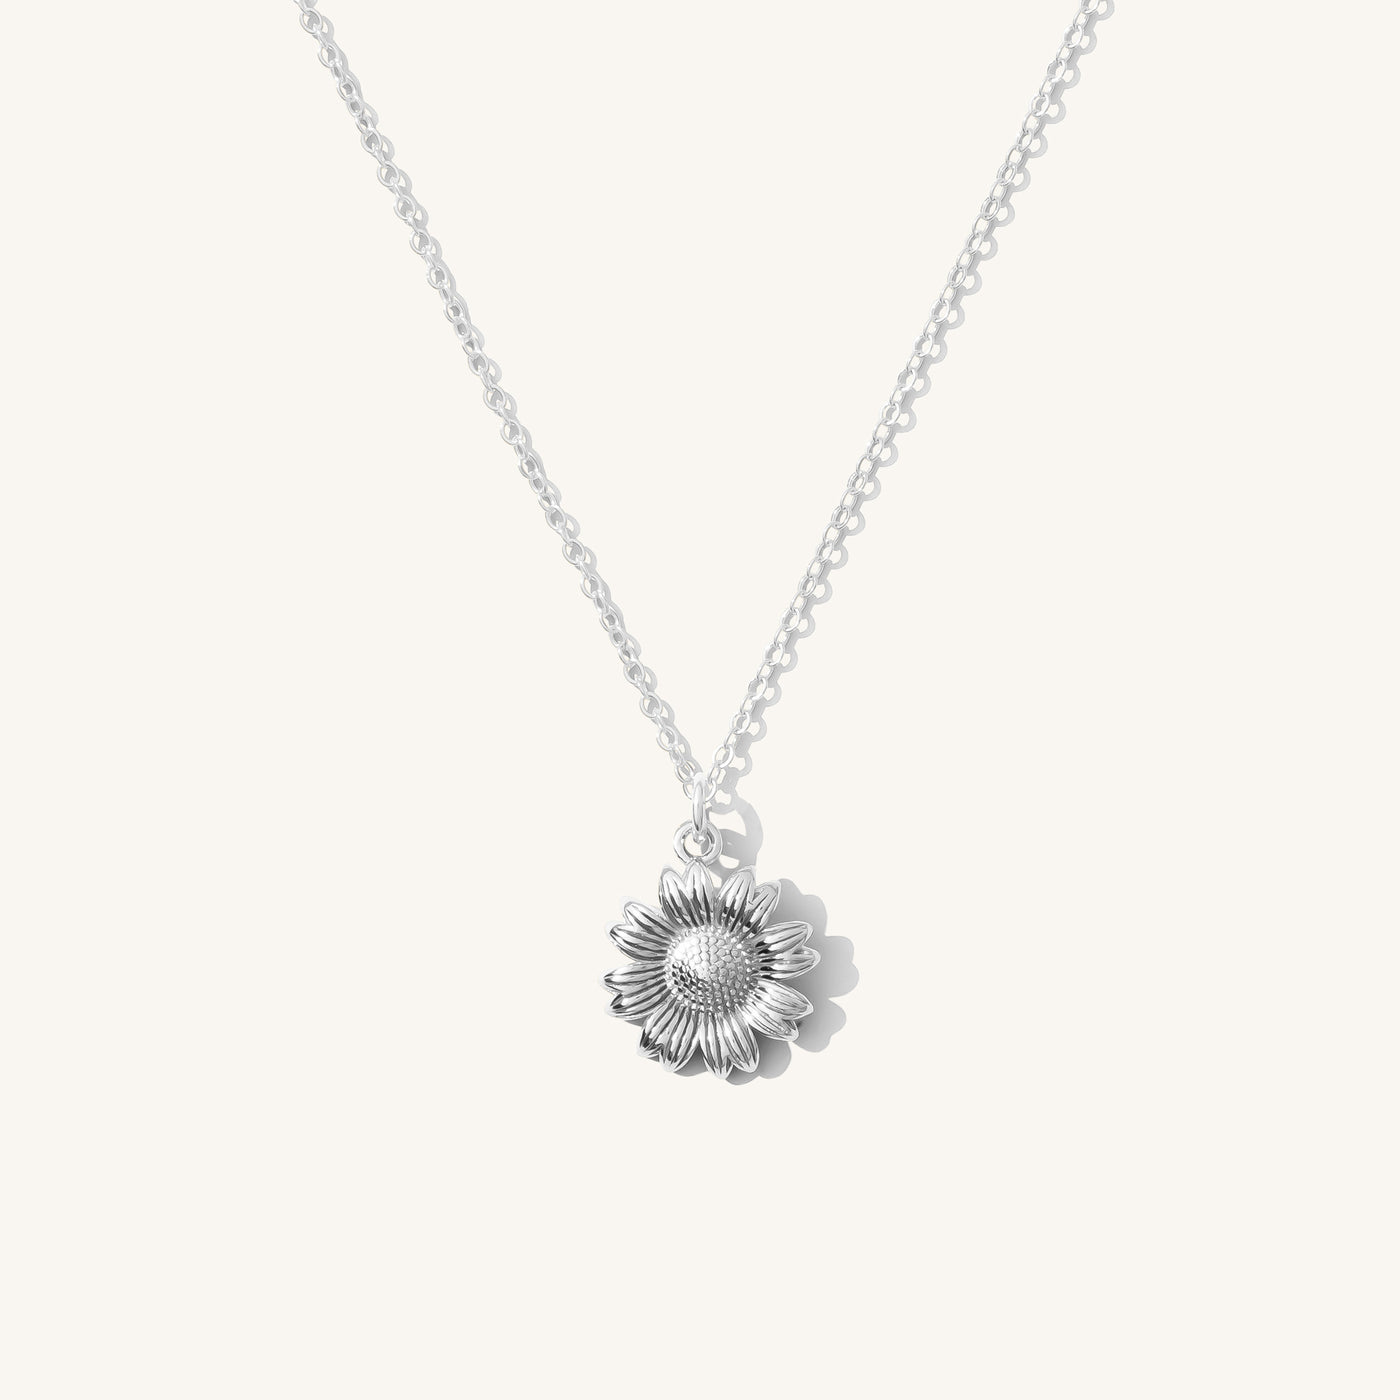 Mother's day jewelry Simulated Diamond Sunflower Design Spinner Pendant  Necklace (20 Inches) in Rhodium Over Sterling Silver and Stainless Steel  0.65 ctw at ShopLC